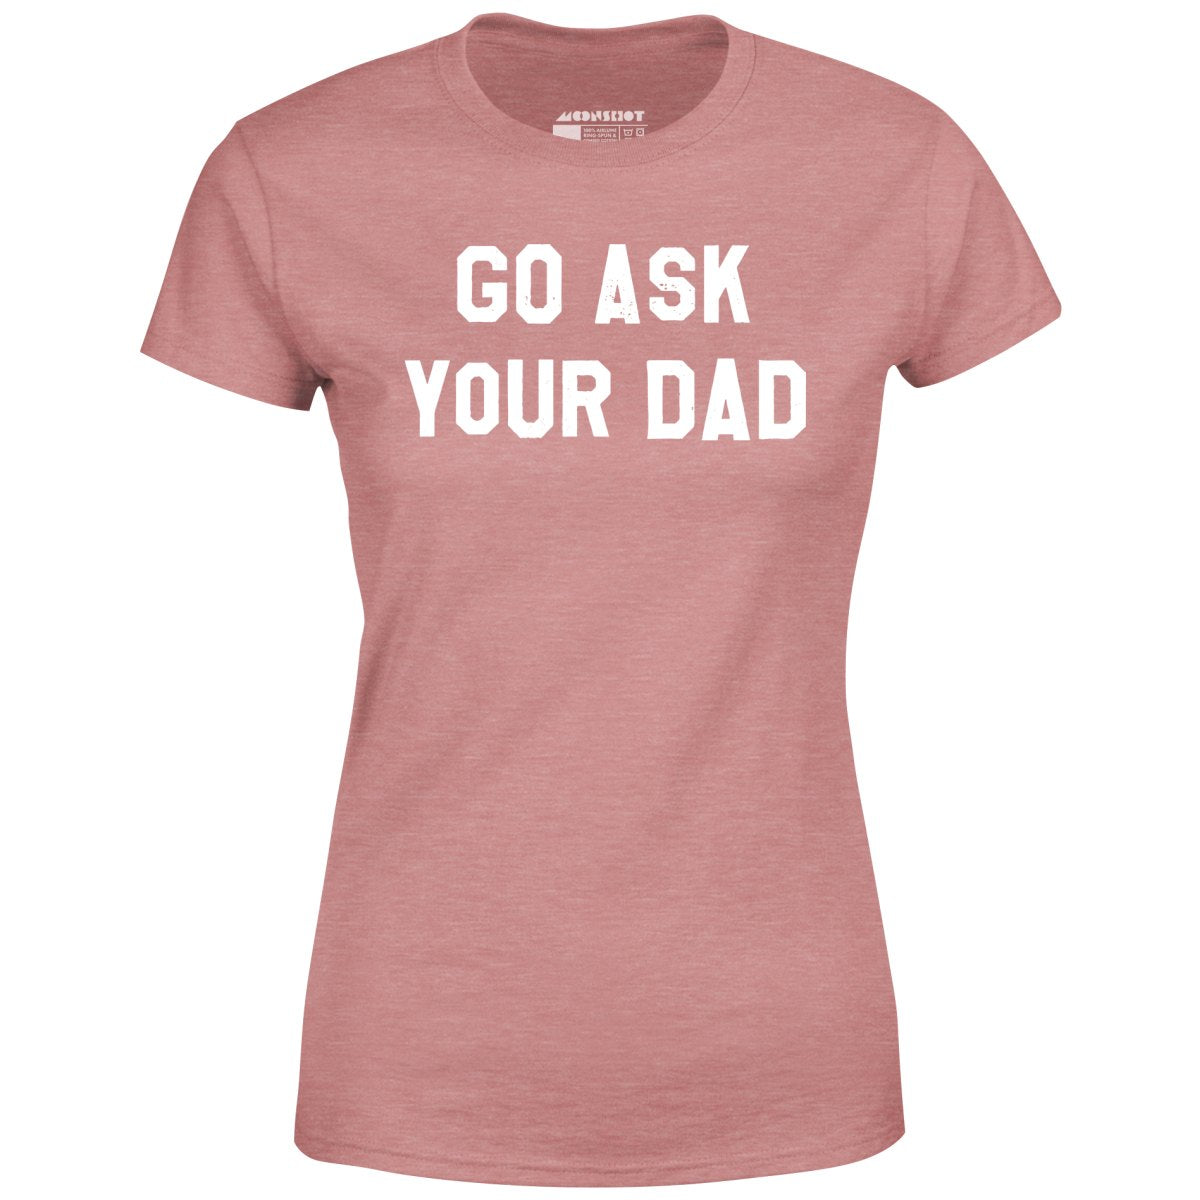 Go Ask Your Dad - Women's T-Shirt